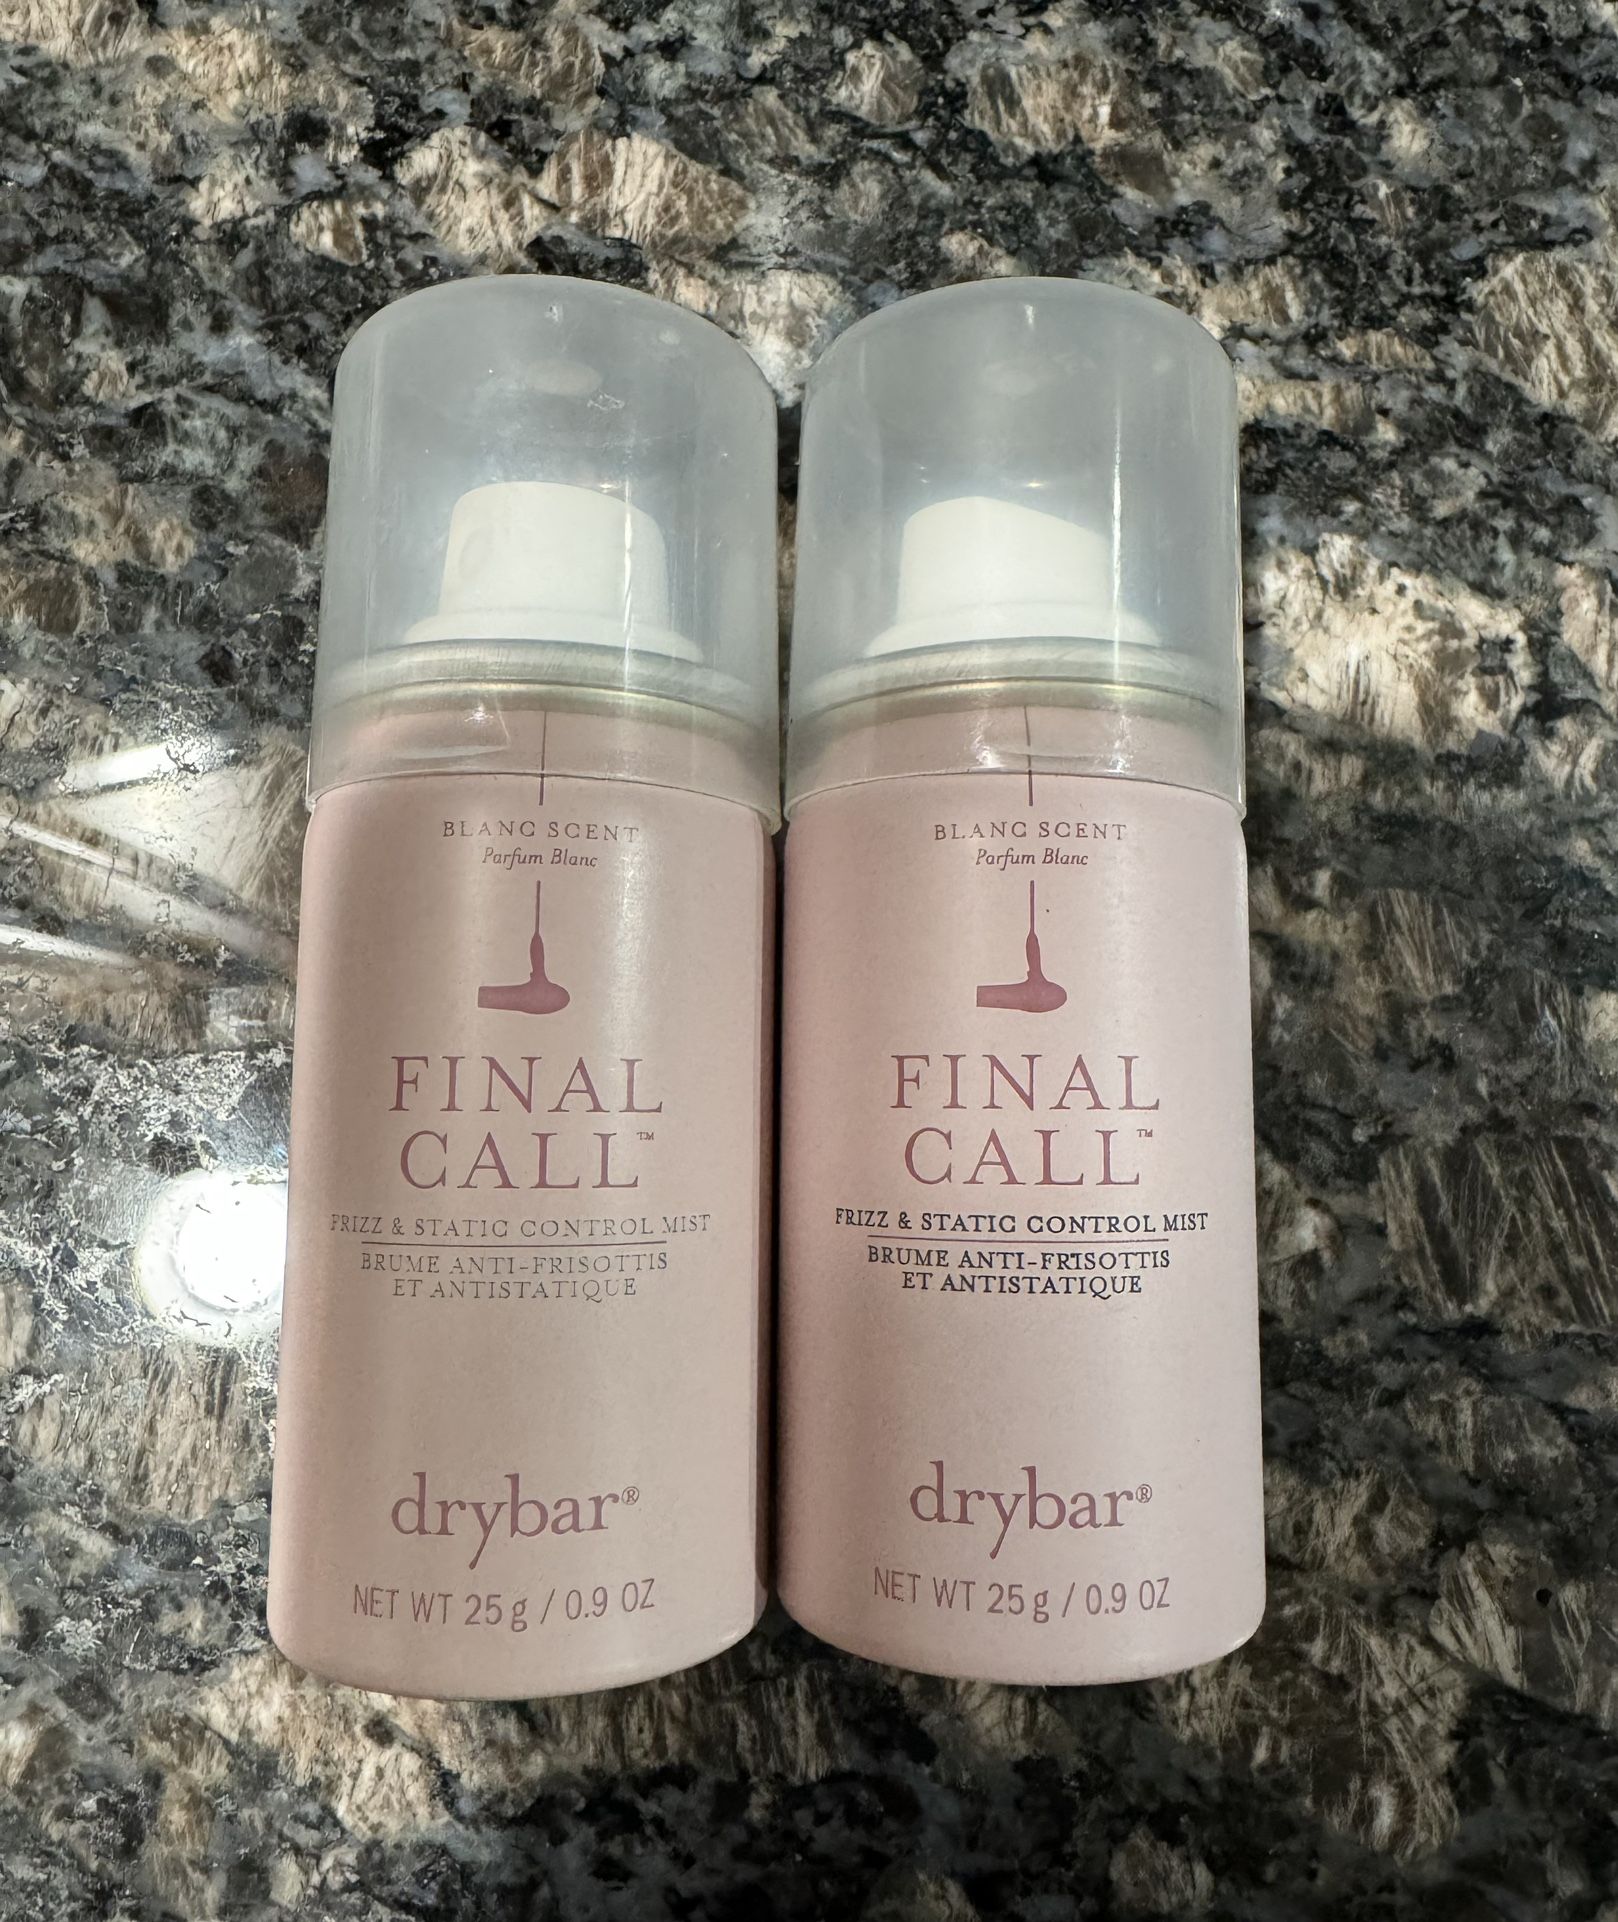 NEW DRYBAR FINAL CALL FRIZZ & STATIC CONTROL MIST $5 For Both!